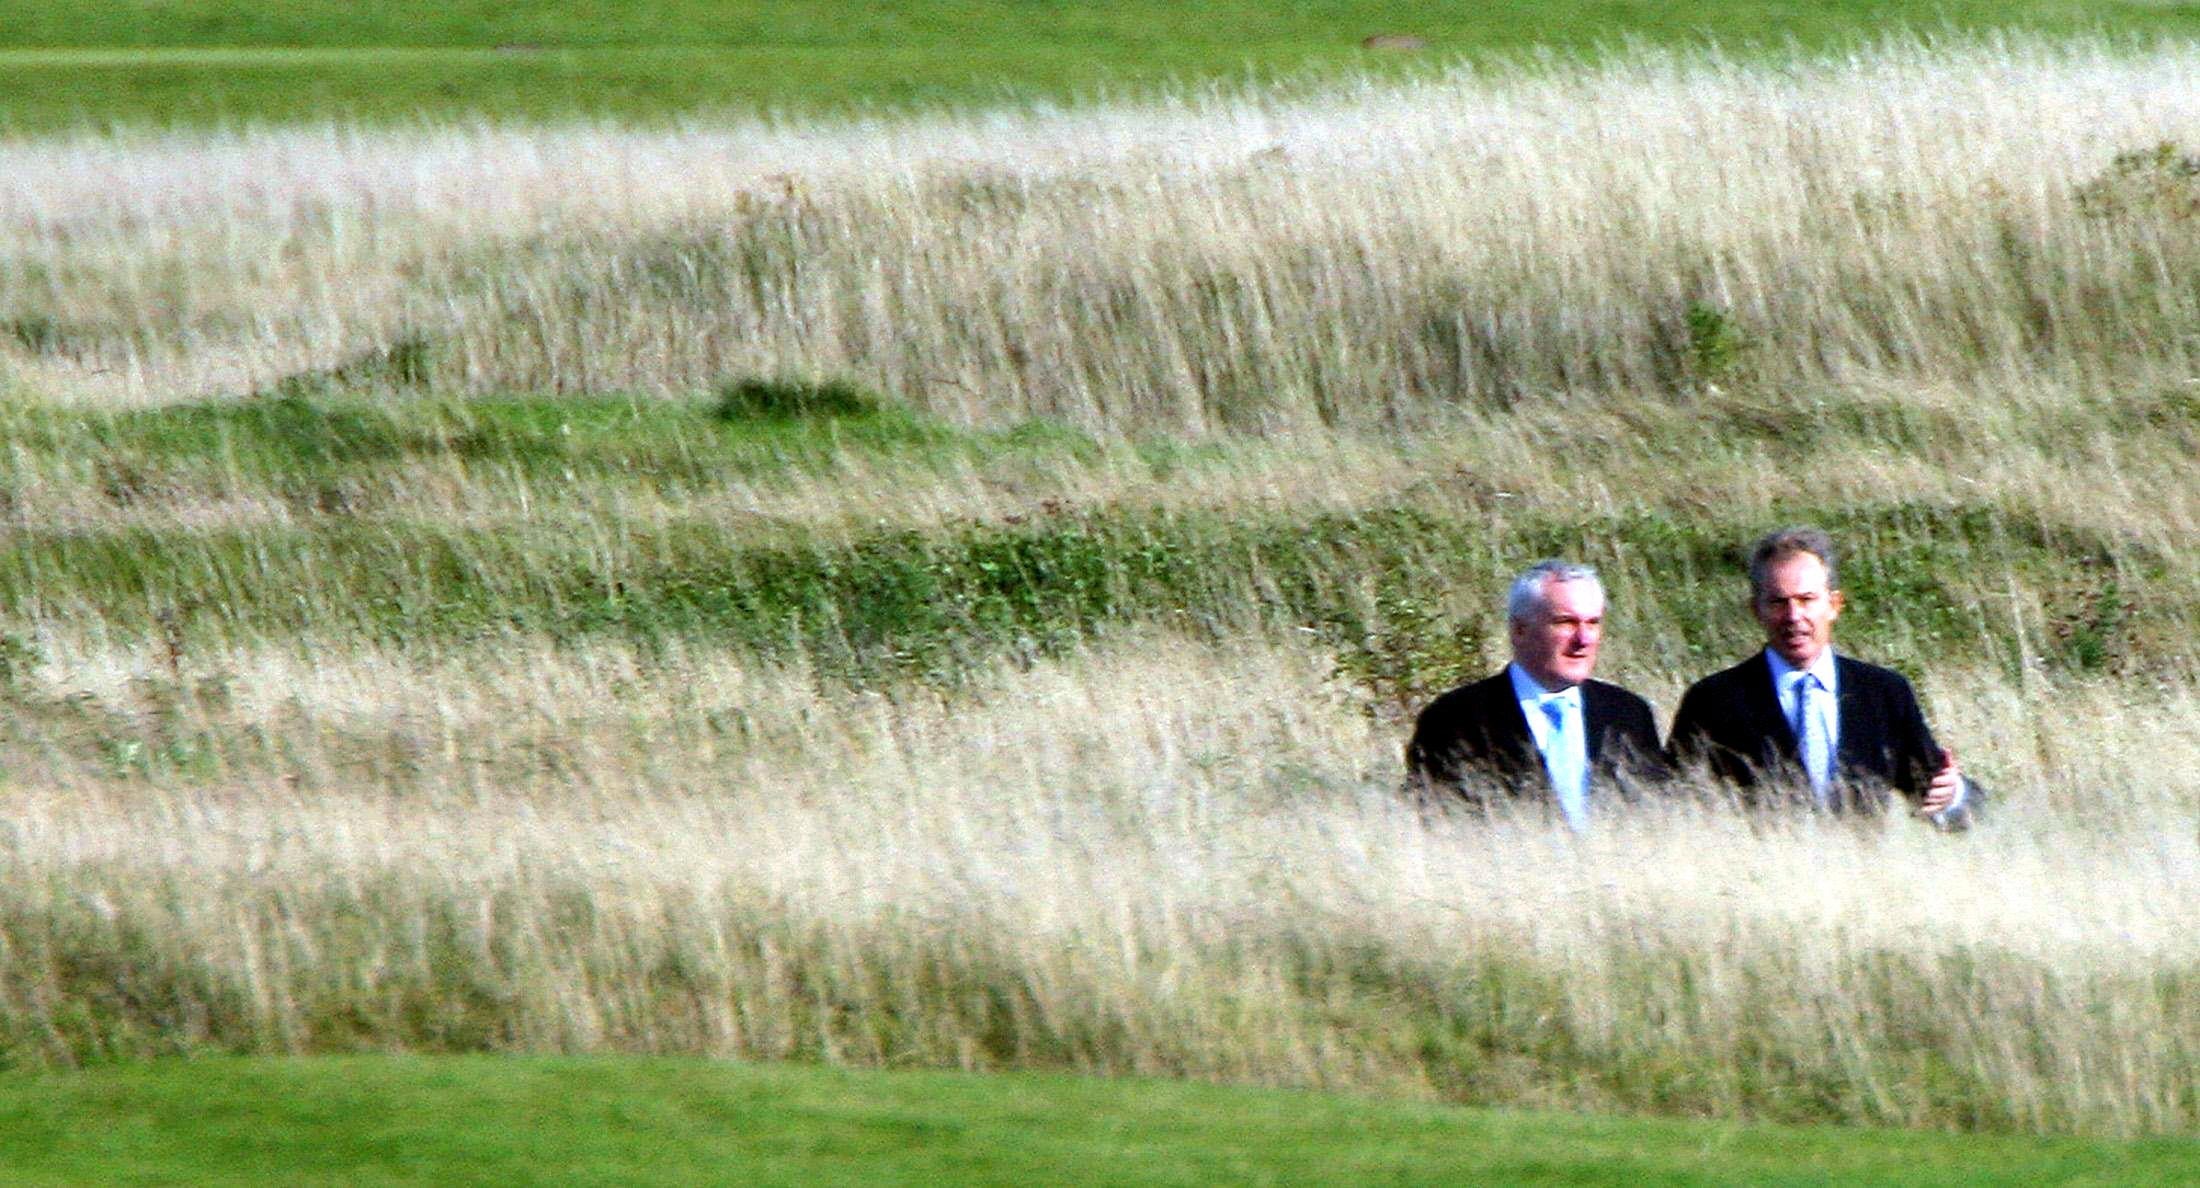 British prime minister Tony Blair and Irish taoiseach Bertie Ahern on the golf course at the Fairmont Hotel in St Andrews, Scotland (Lewis Whyld/PA)